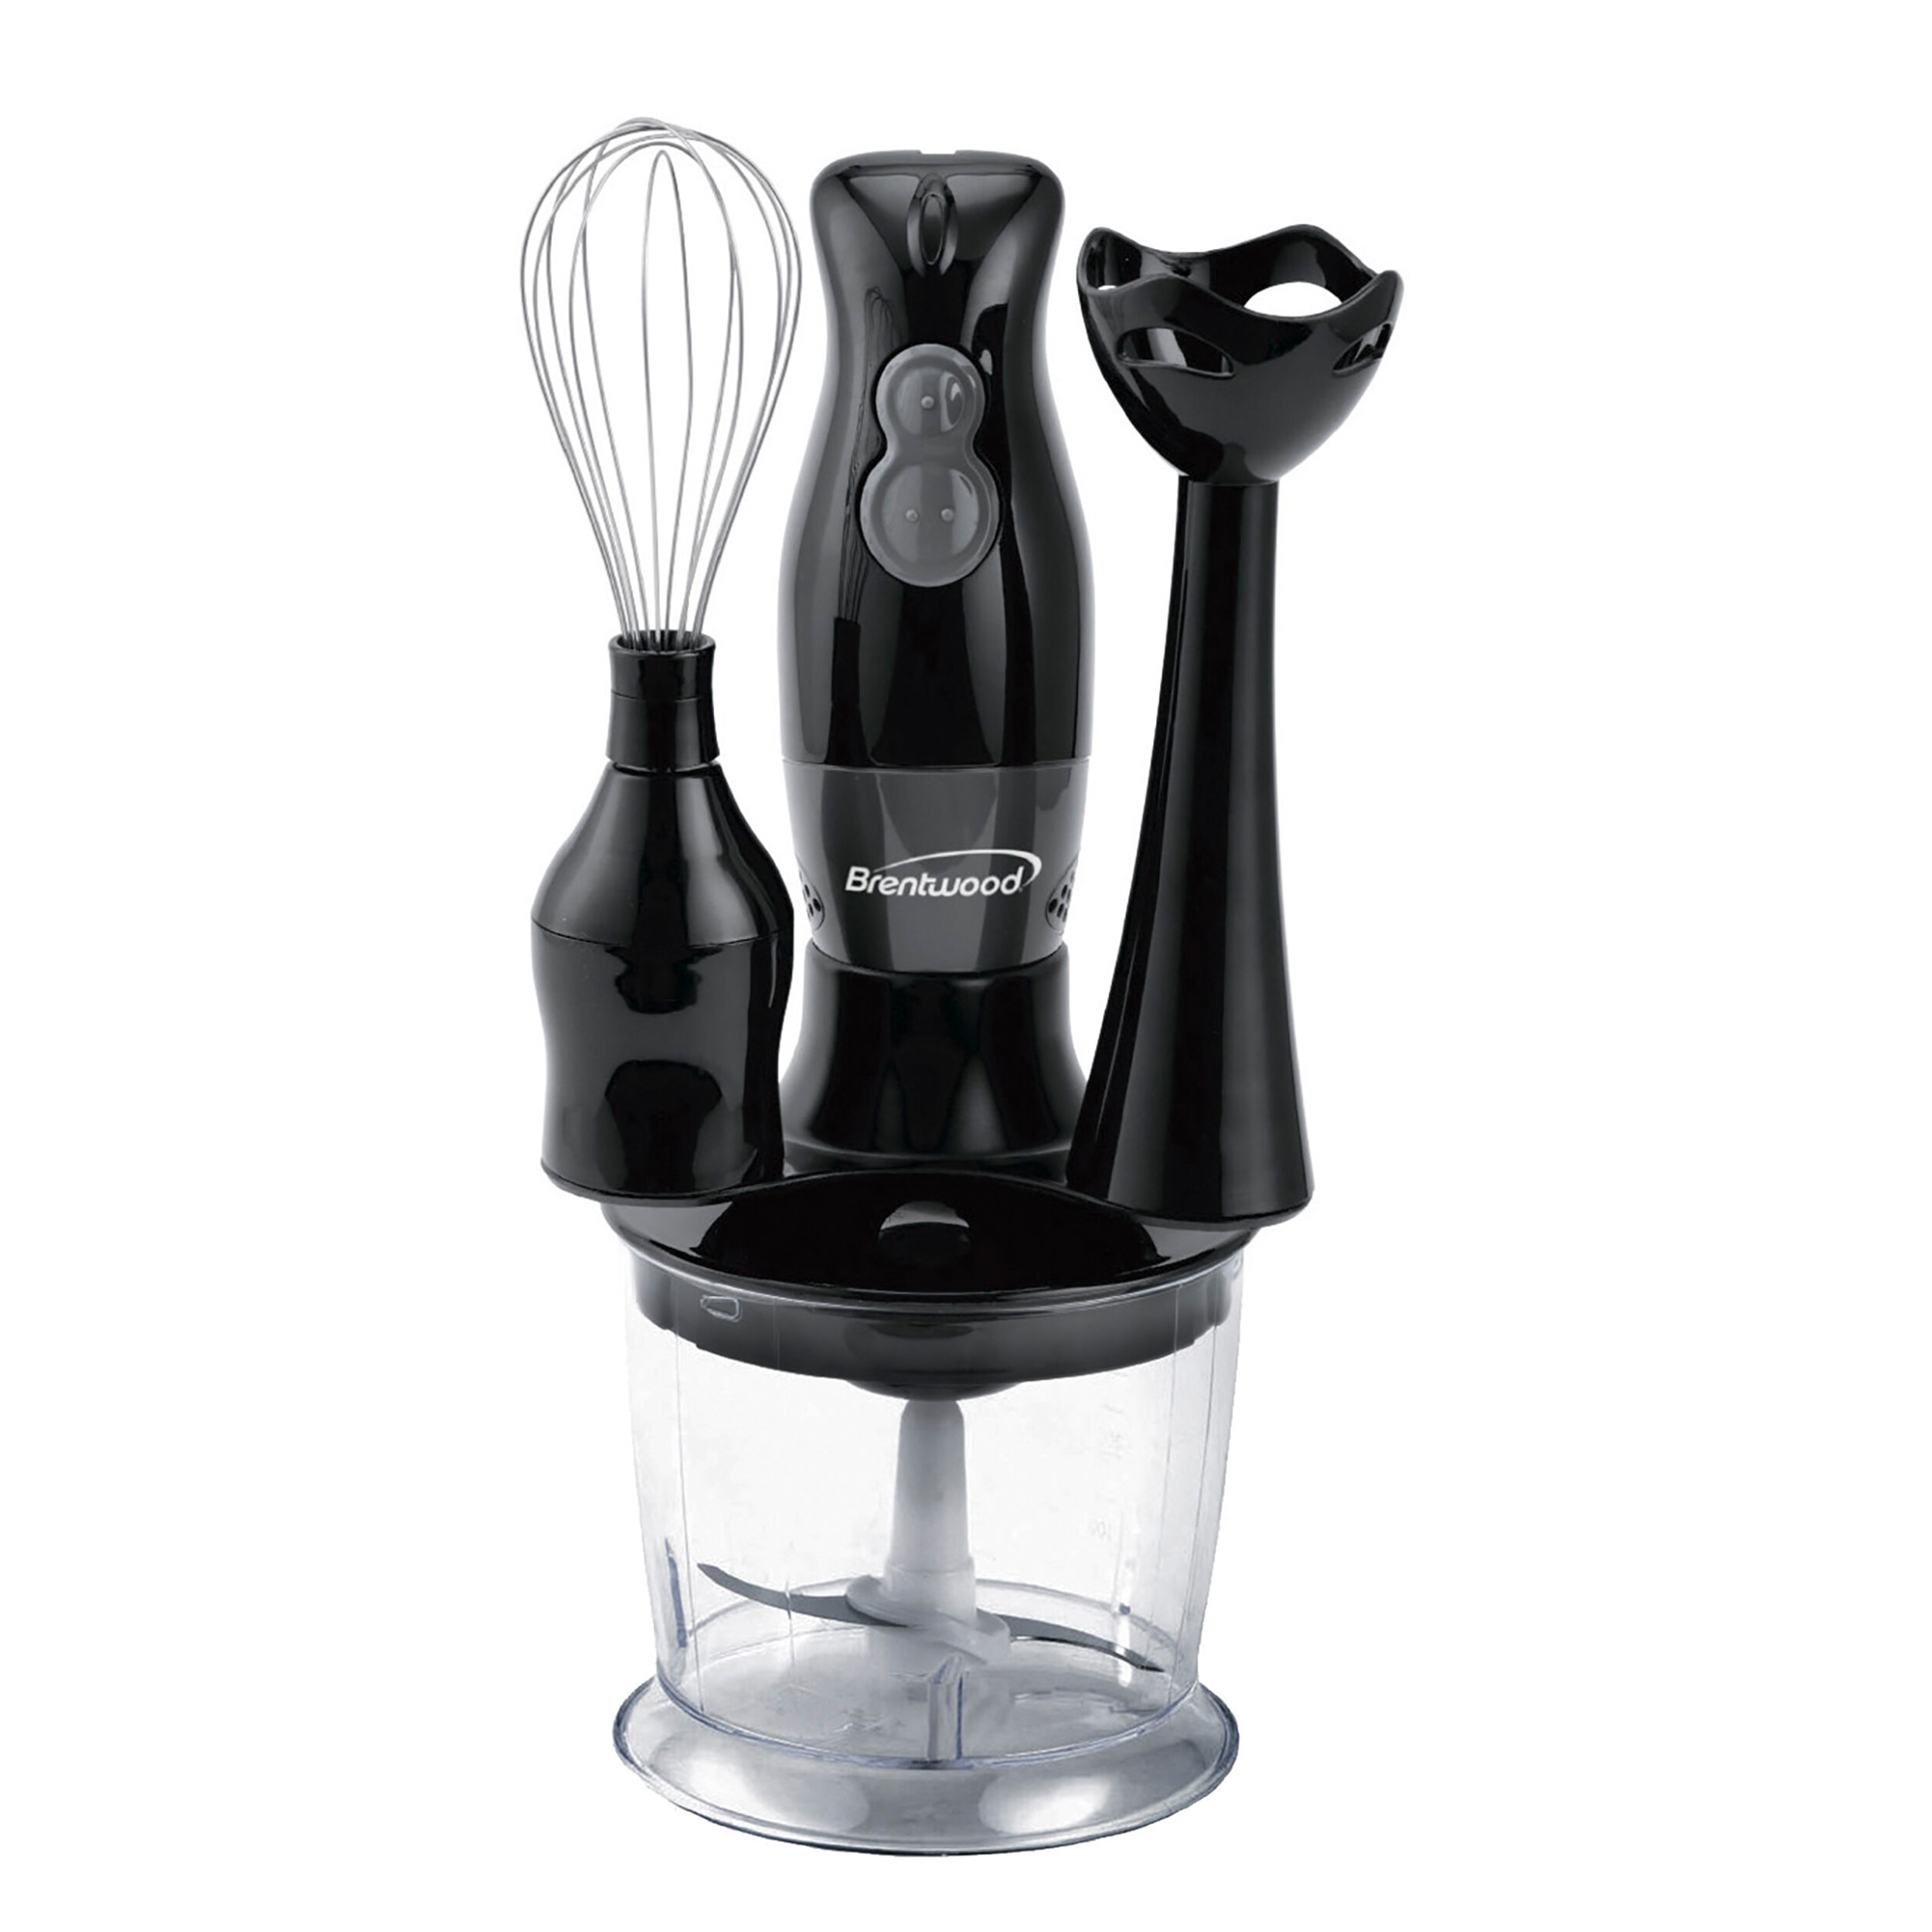 Ovente Electric Immersion Hand Blender 300 Watt 2 Mixing Speed with Stainless